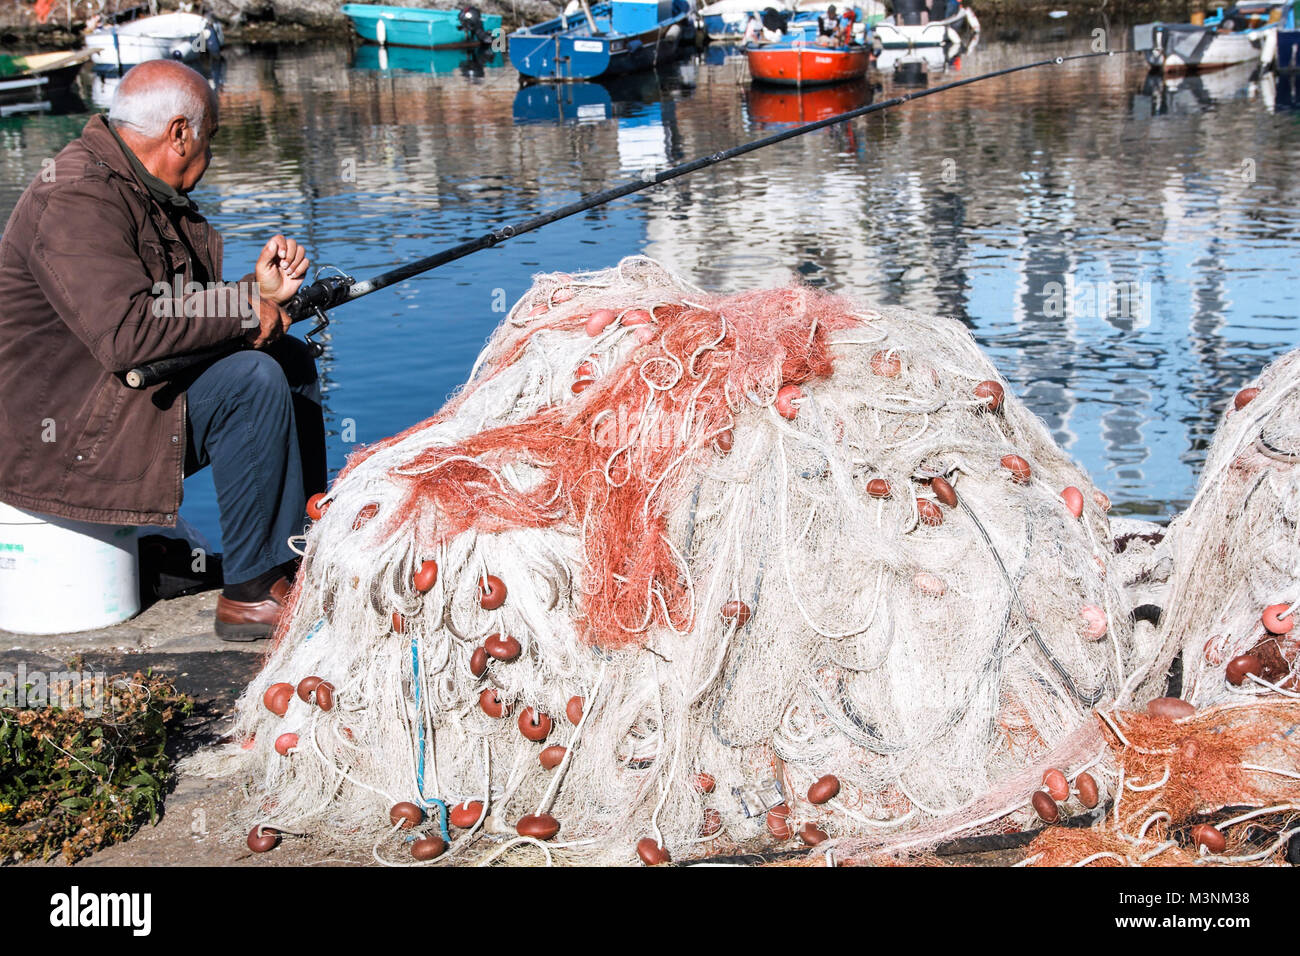 https://c8.alamy.com/comp/M3NM38/at-pozzuoli-italy-on-12112016-old-man-fishing-with-a-fishing-pole-M3NM38.jpg